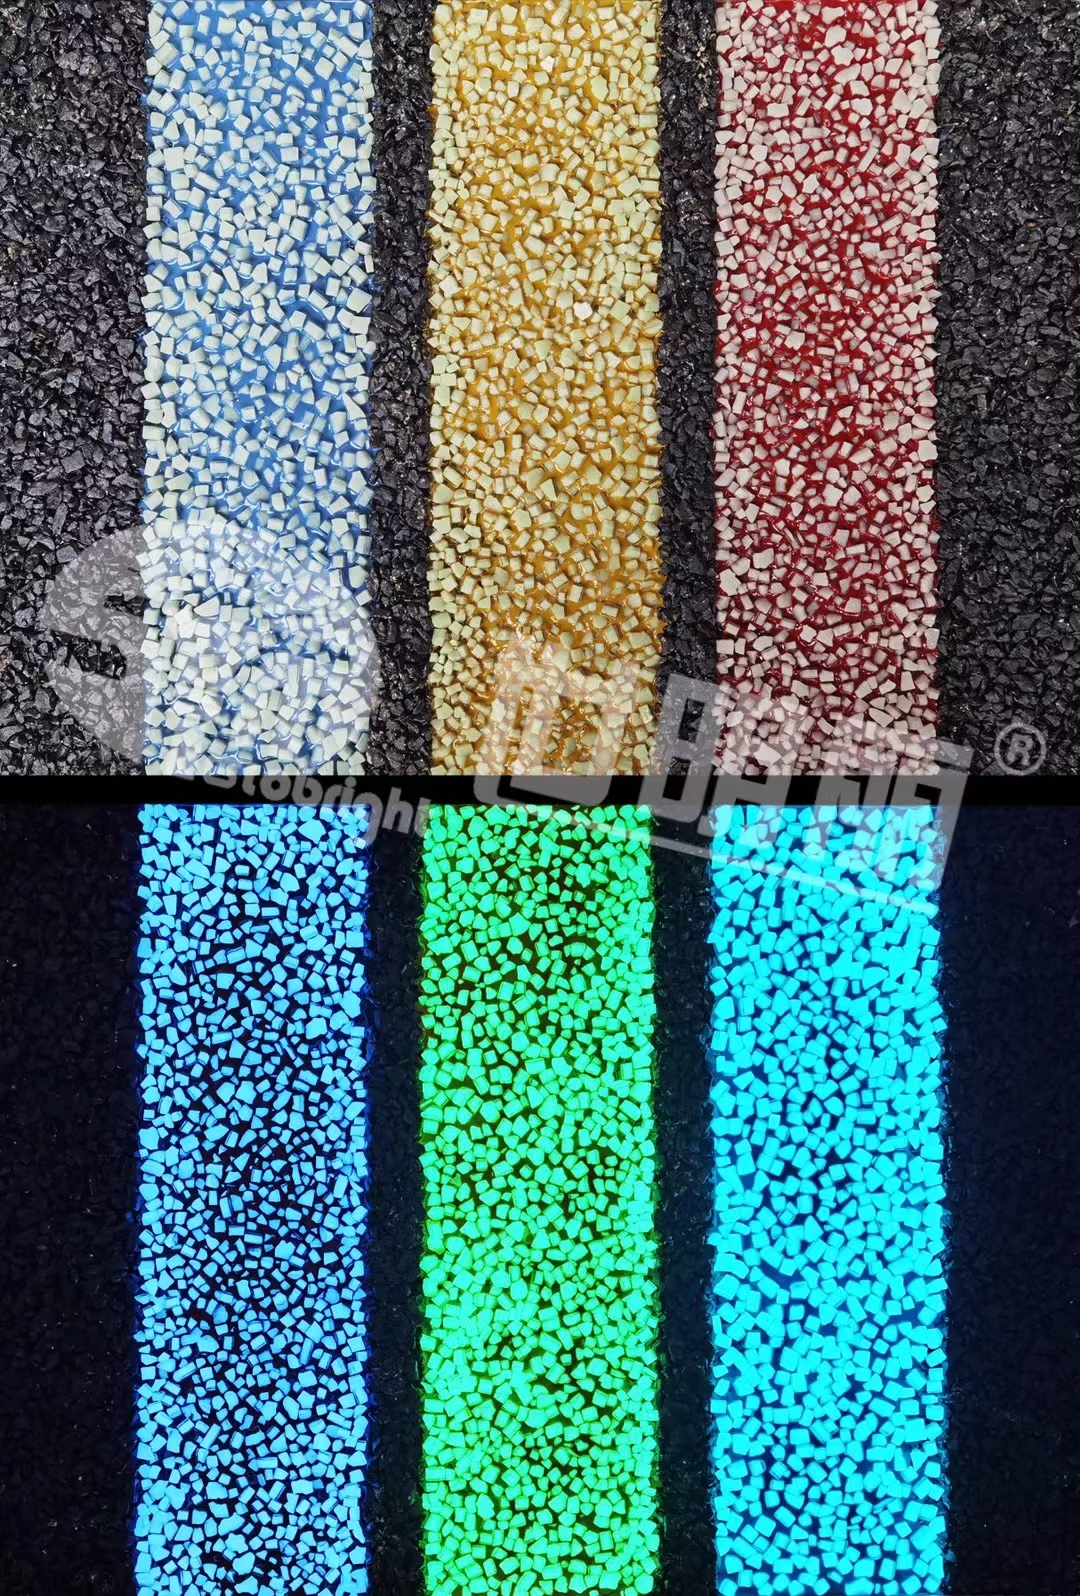 Anti-slip Star Pavement Road Surface Ceramic Particles Inorganic Self-luminous Stone for Park And Garden Trail Glow in The Dark